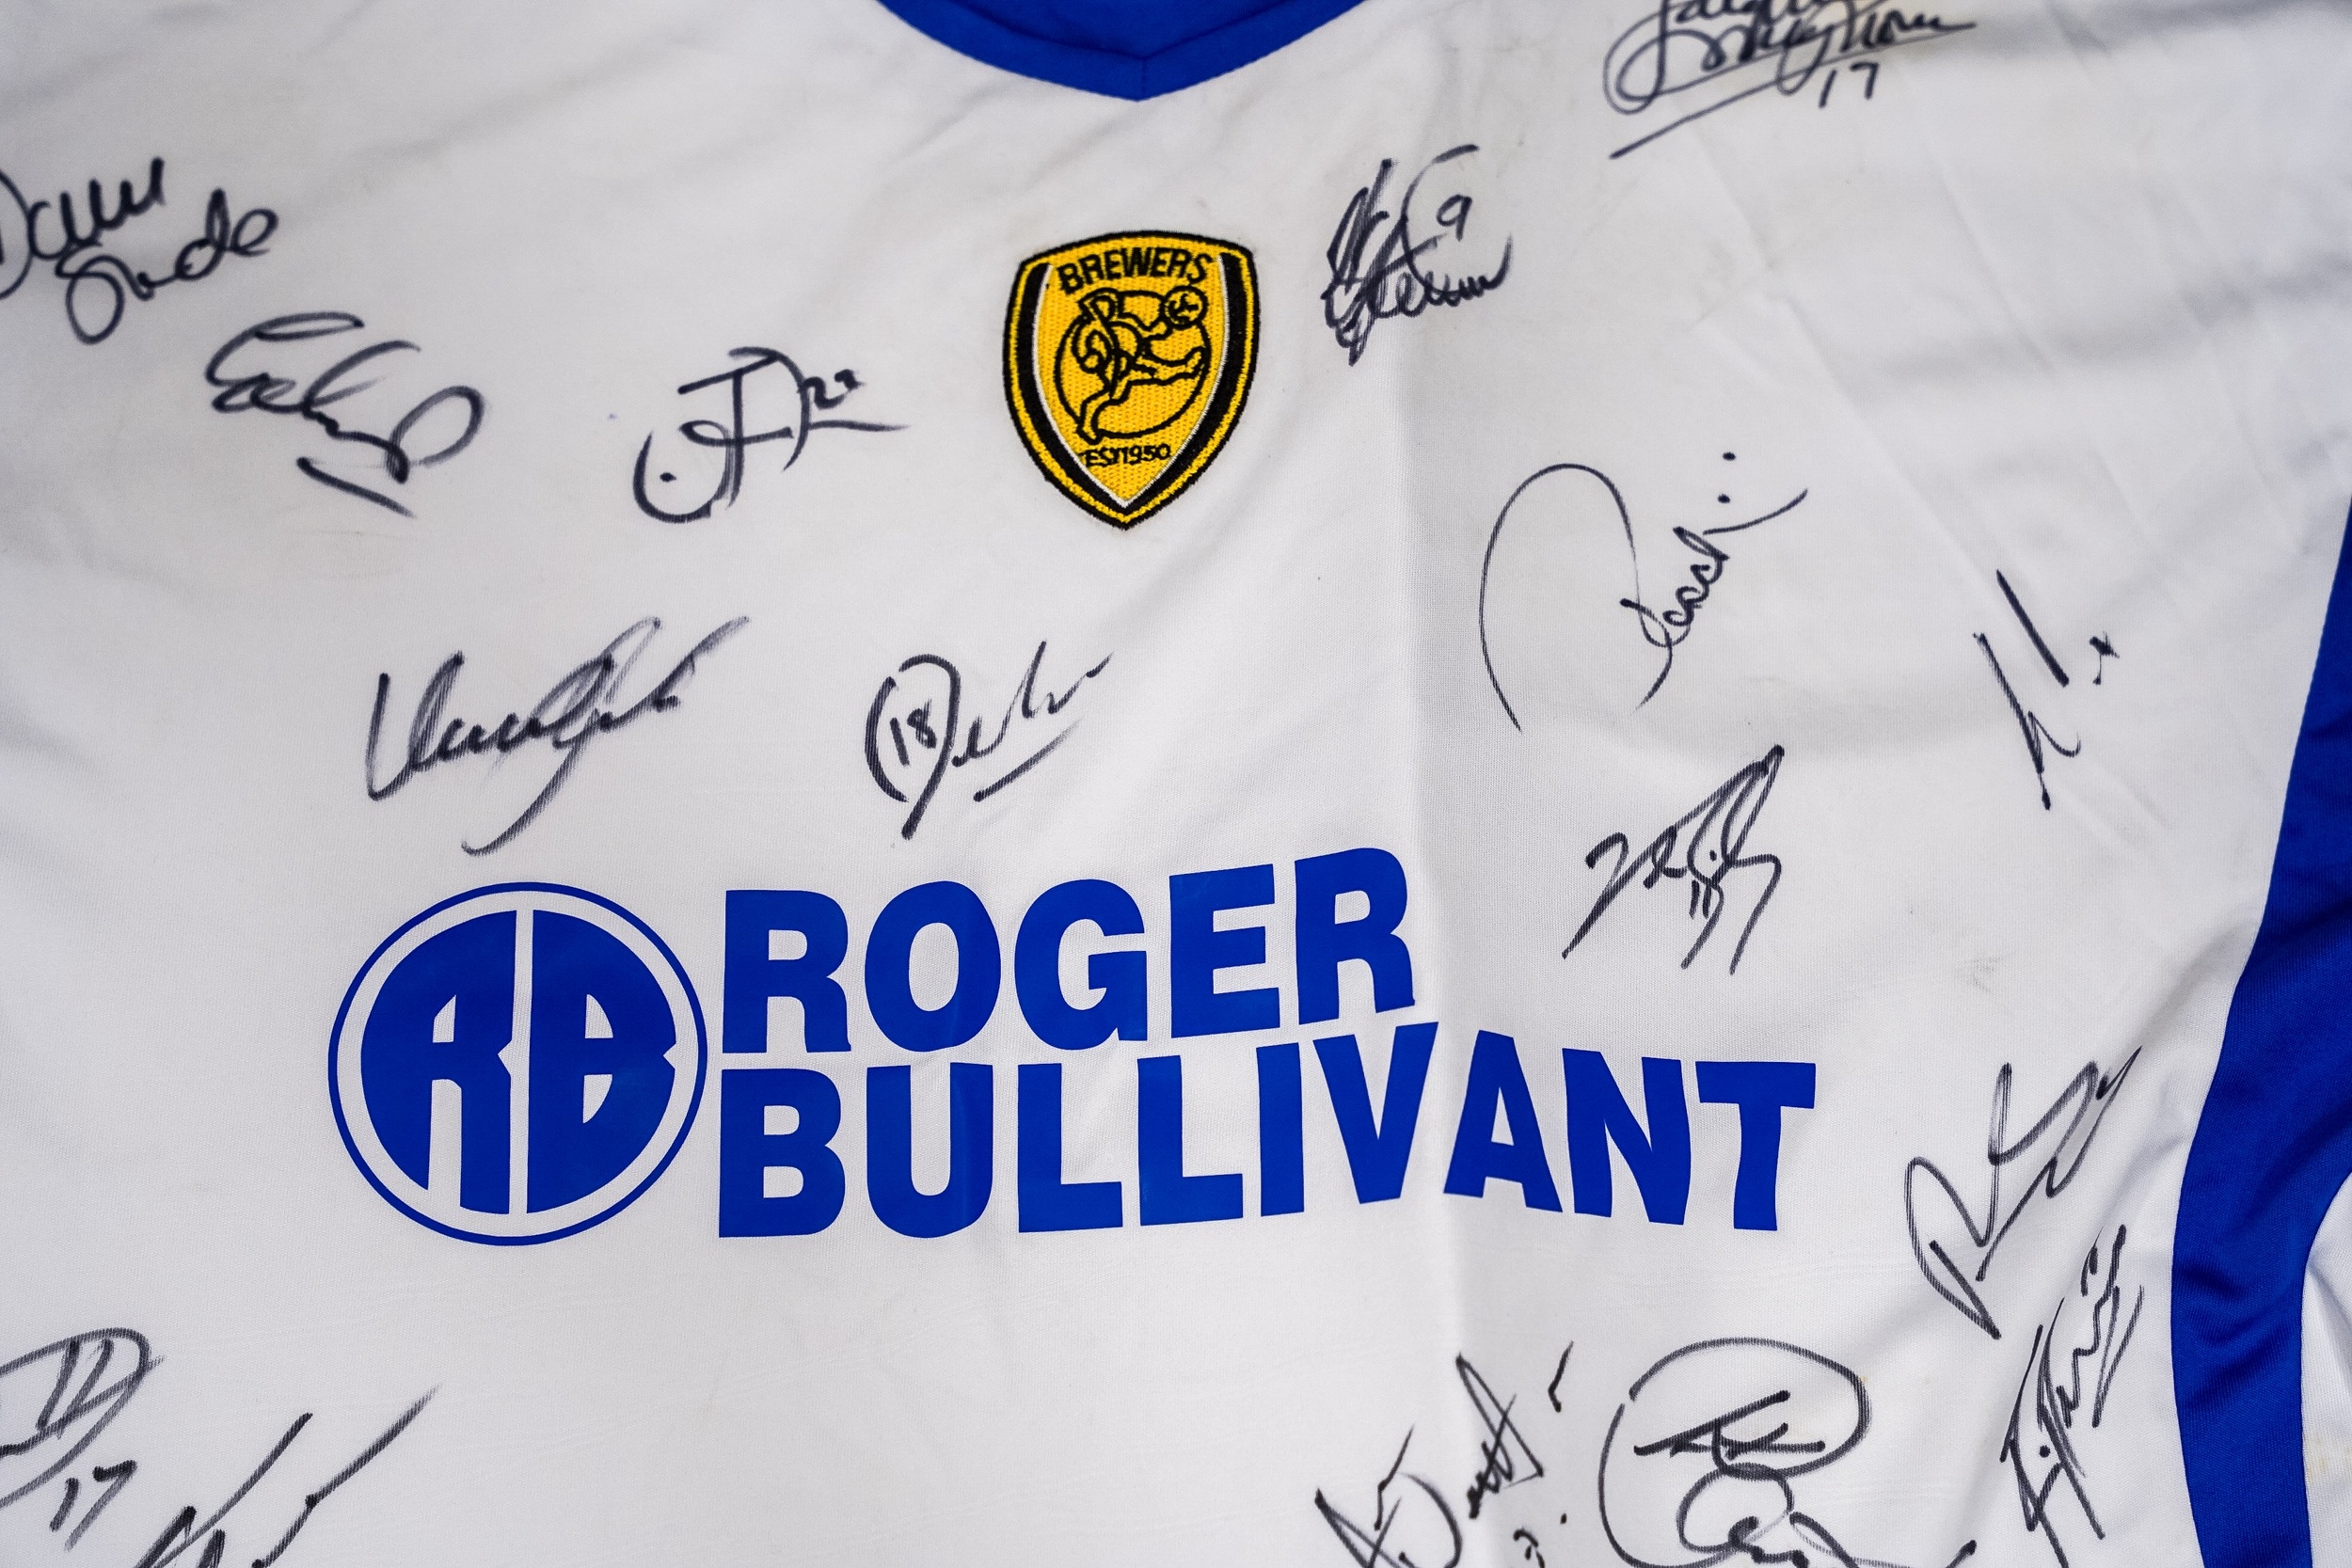 A Burton Albion Football club "The Brewers" signed shirt - Image 3 of 7